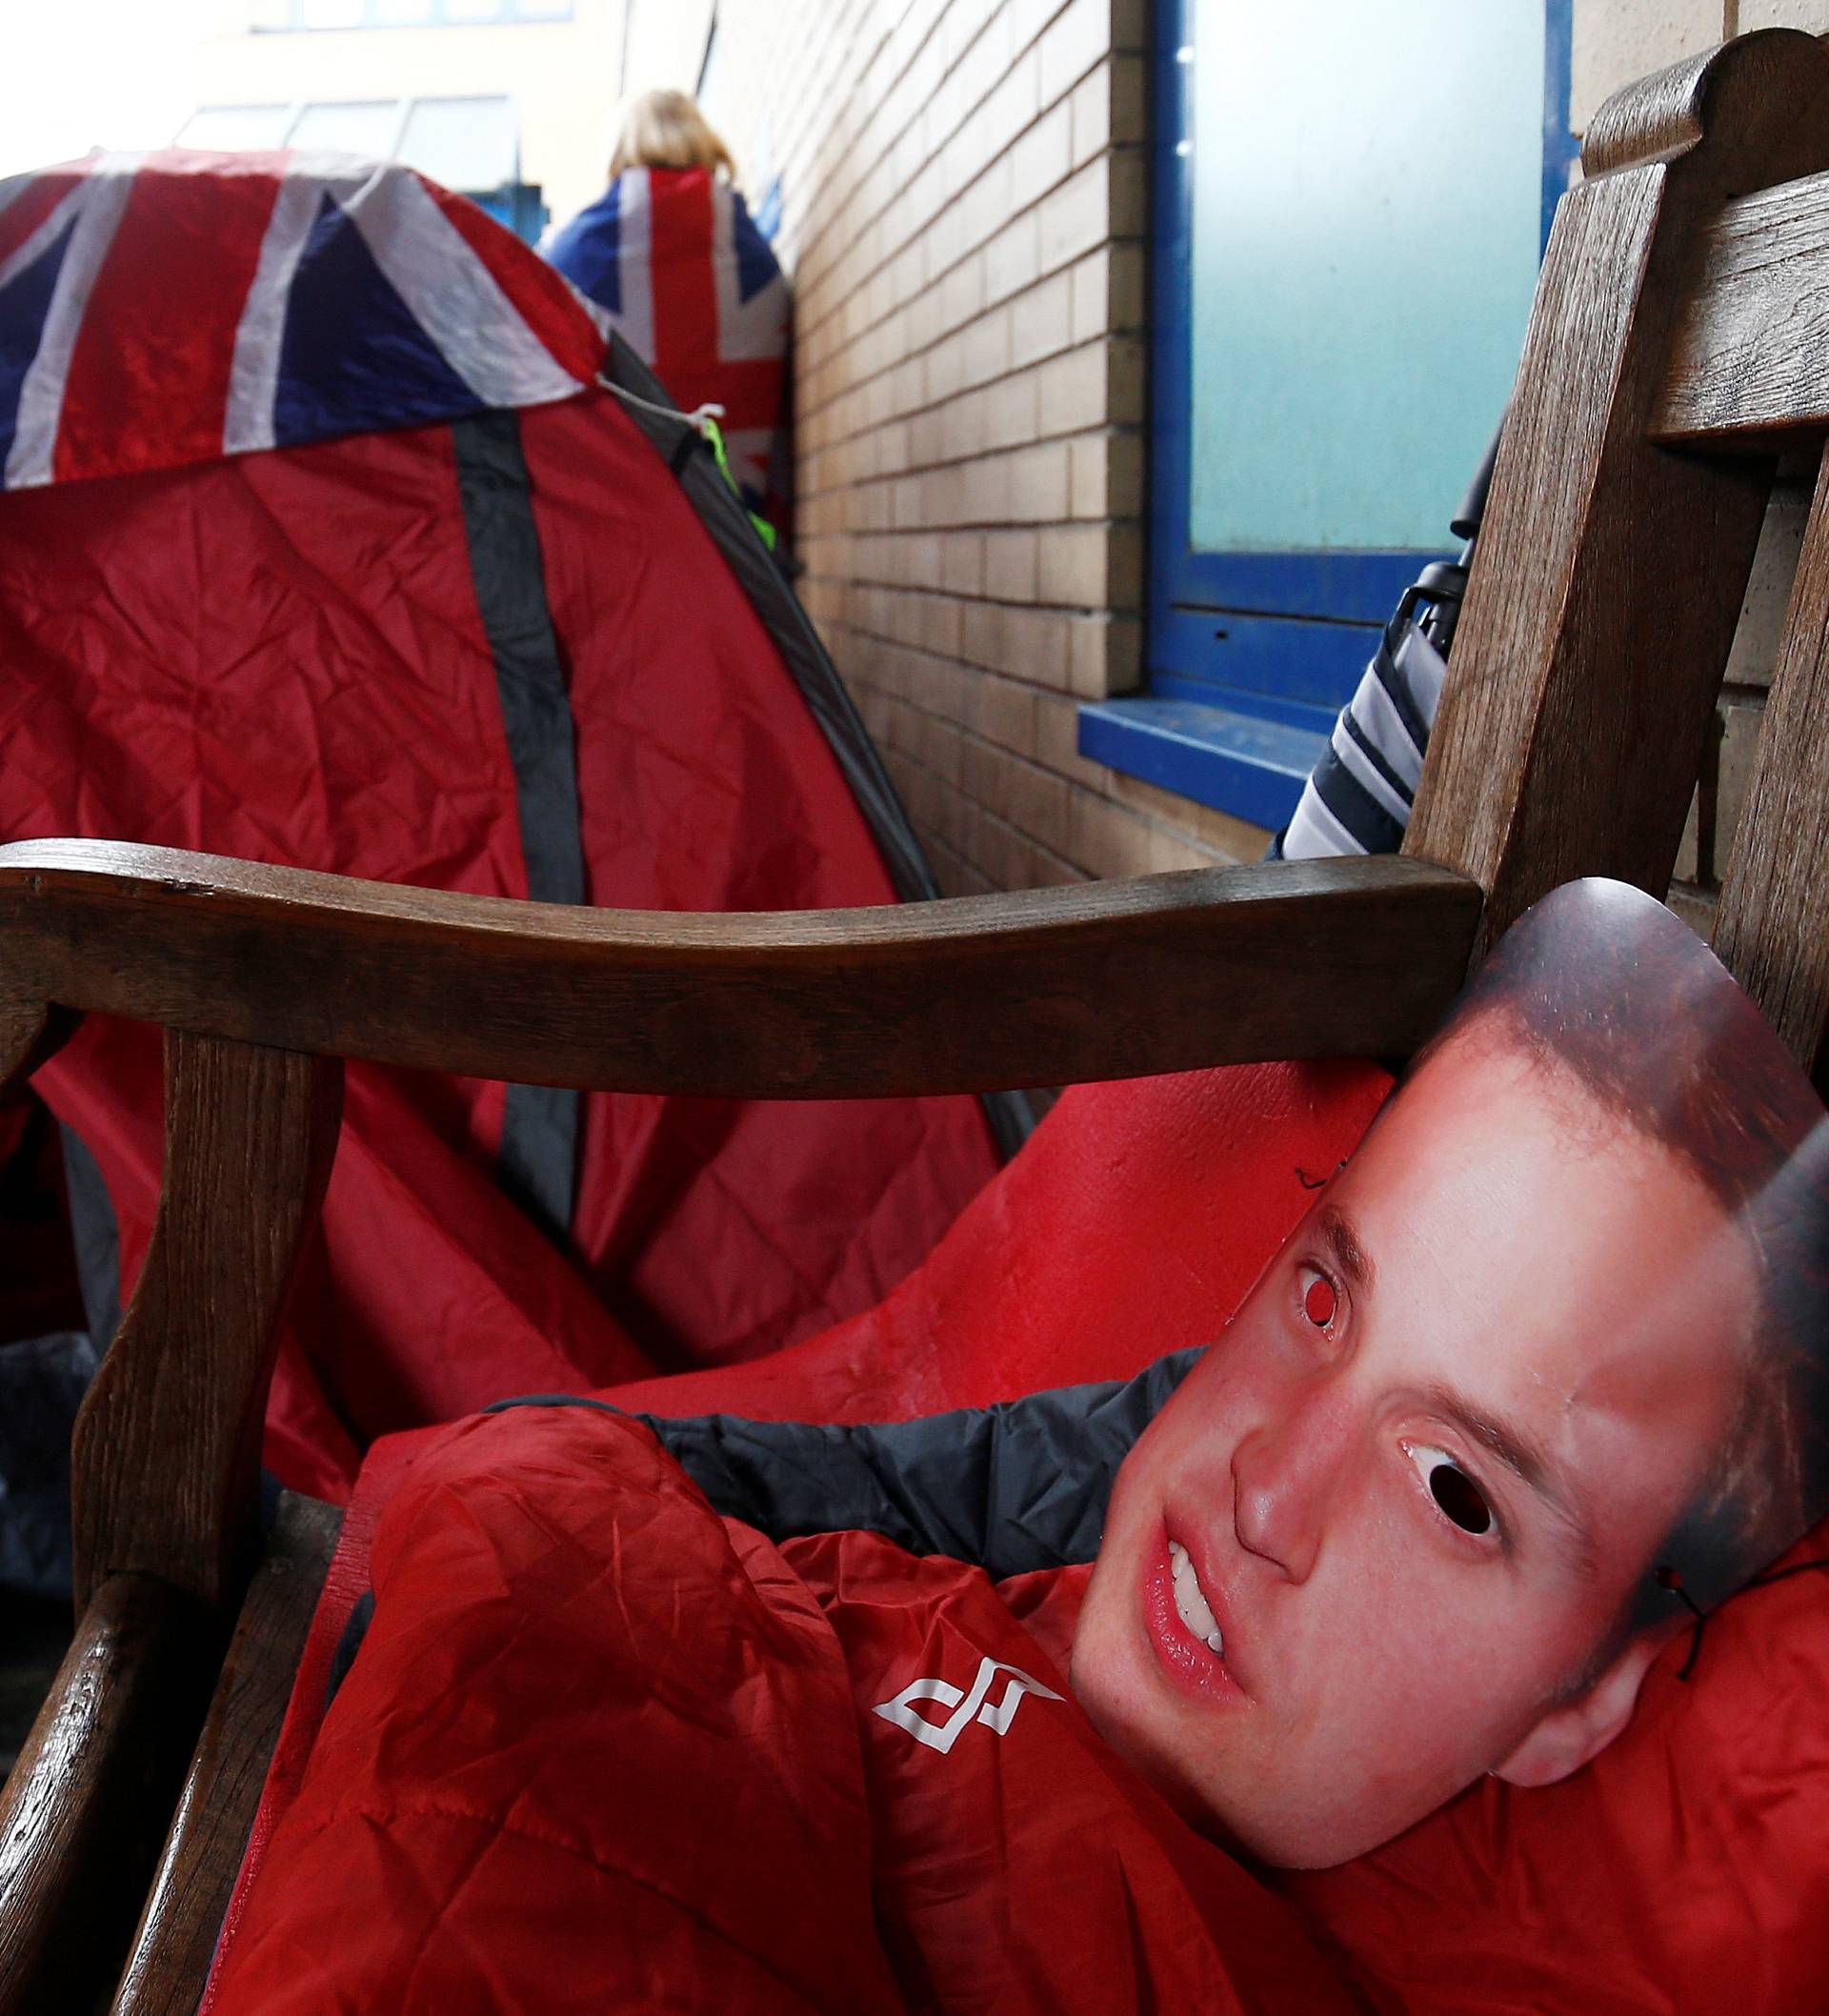 A cardboard Prince William mask is seen next to a tent belonging to fans of Britain's royal family who are camped out outside the hospital where Catherine, the Duchess of Cambridge, is due to give birth, in London